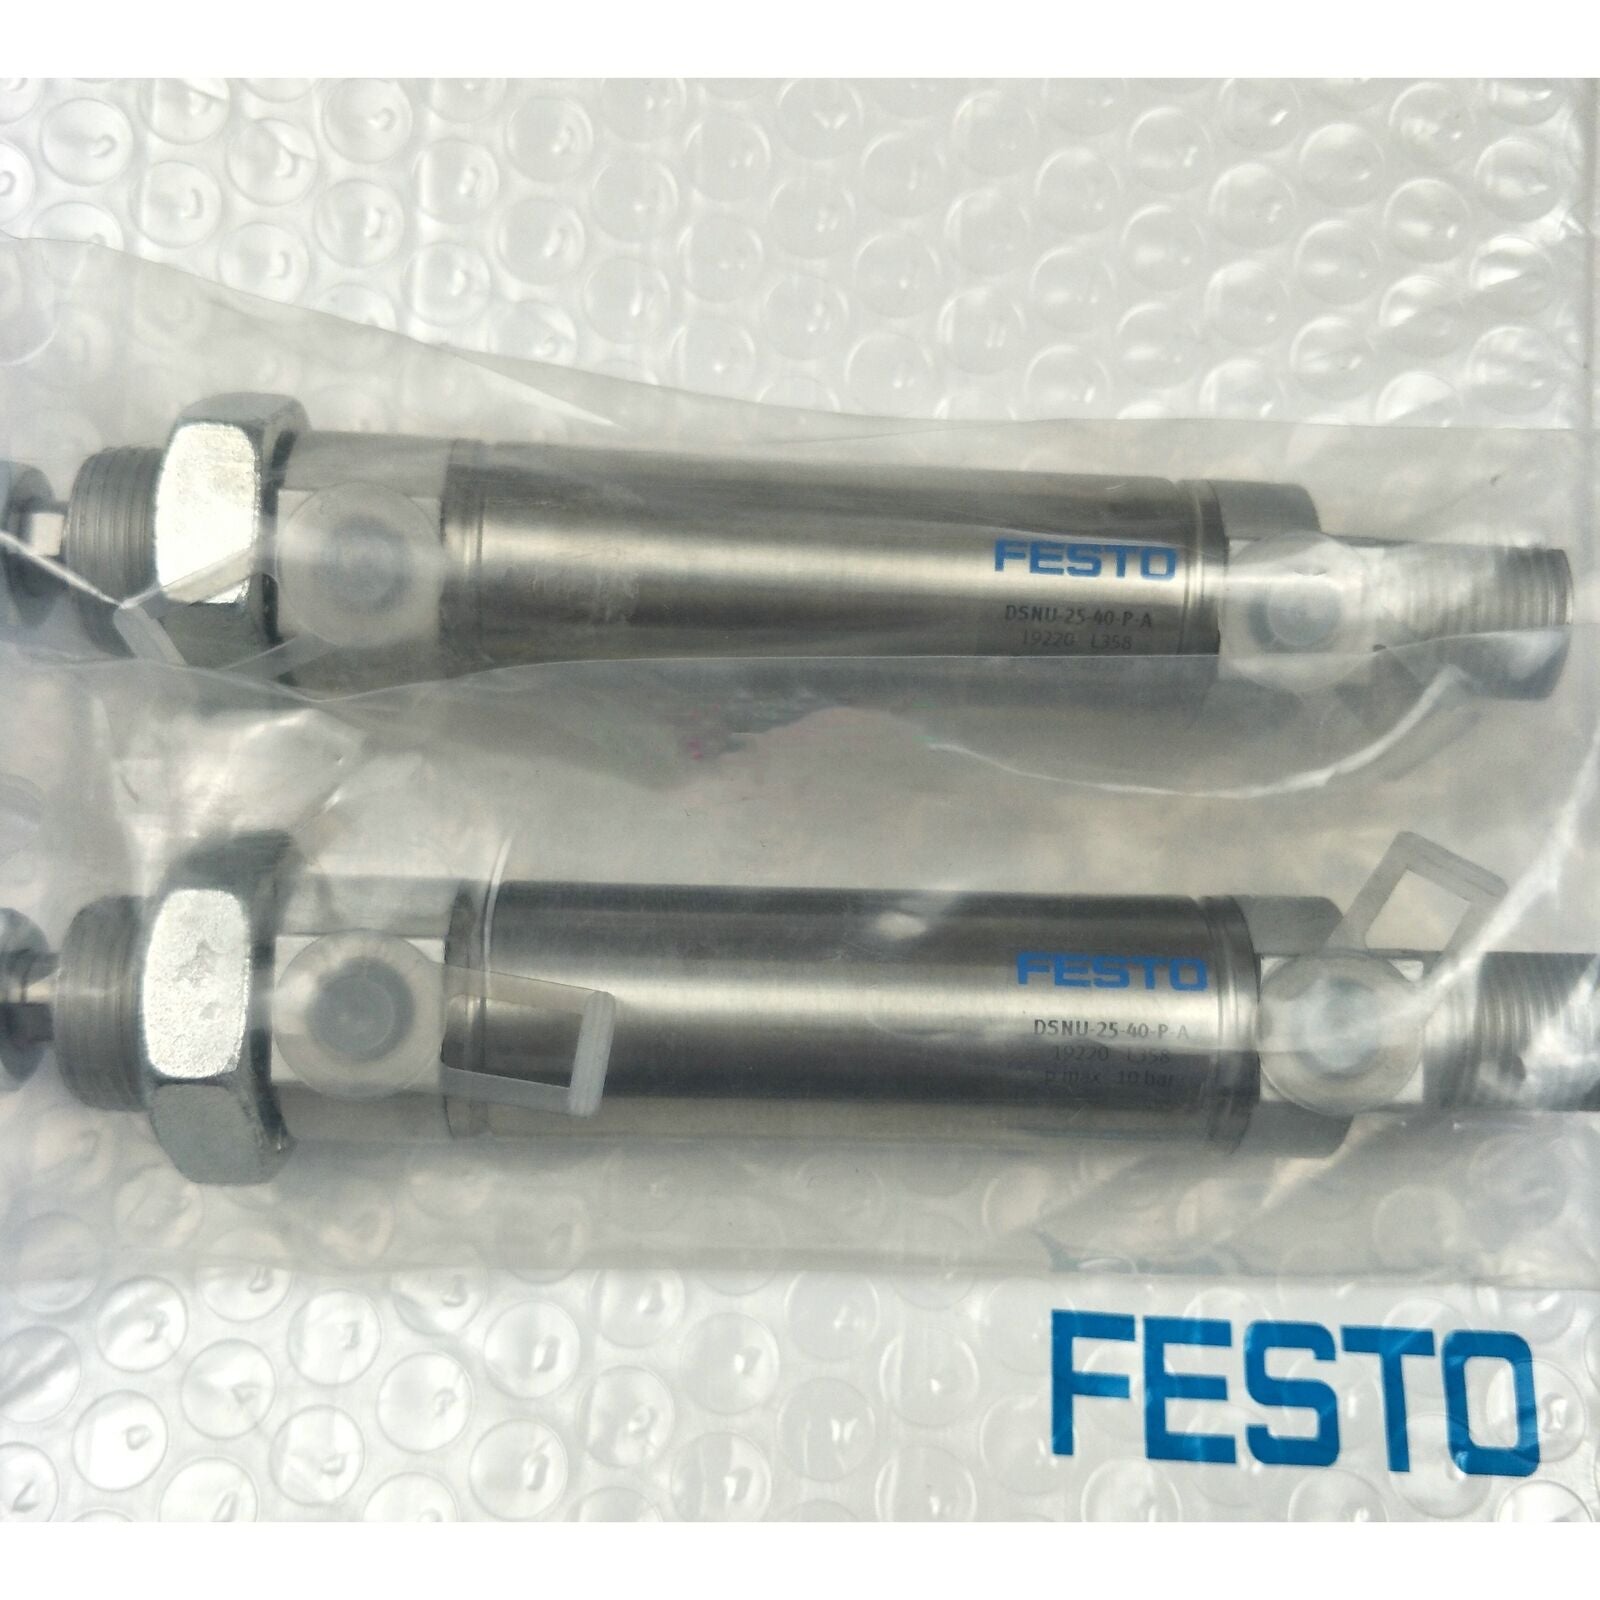 new one  for FESTO Mini cylinder DSNU-25-40-P-A 19220 spot stock